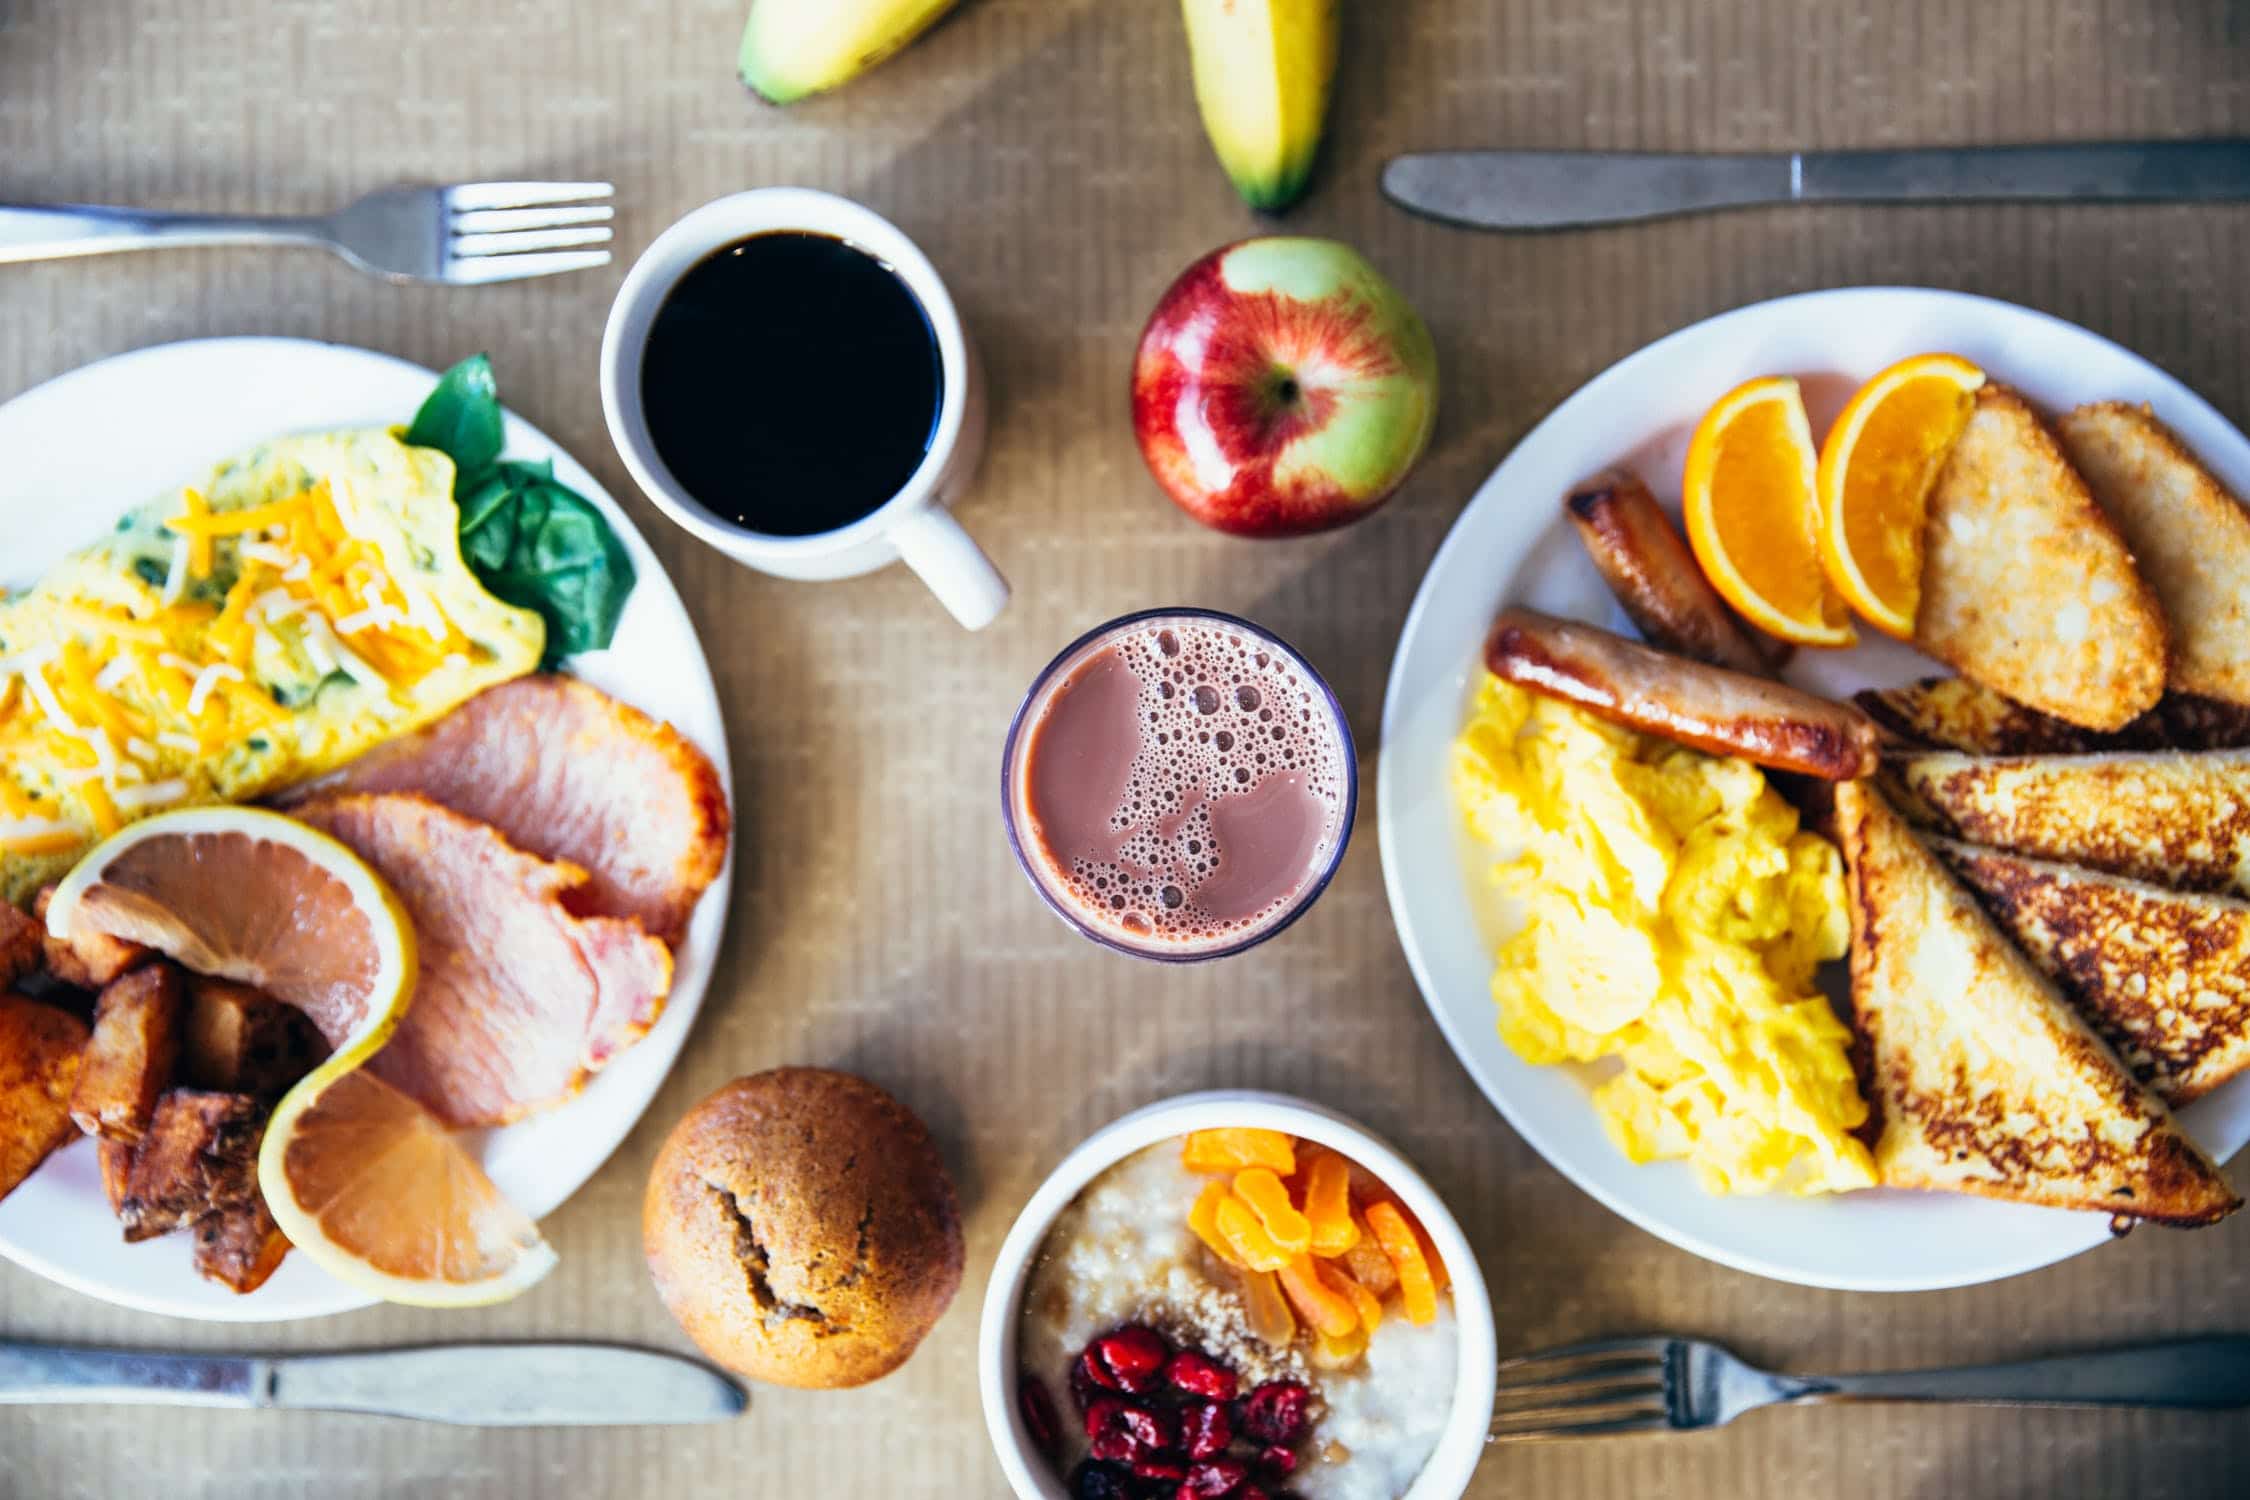 What to Eat on a Keto Diet for Breakfast?